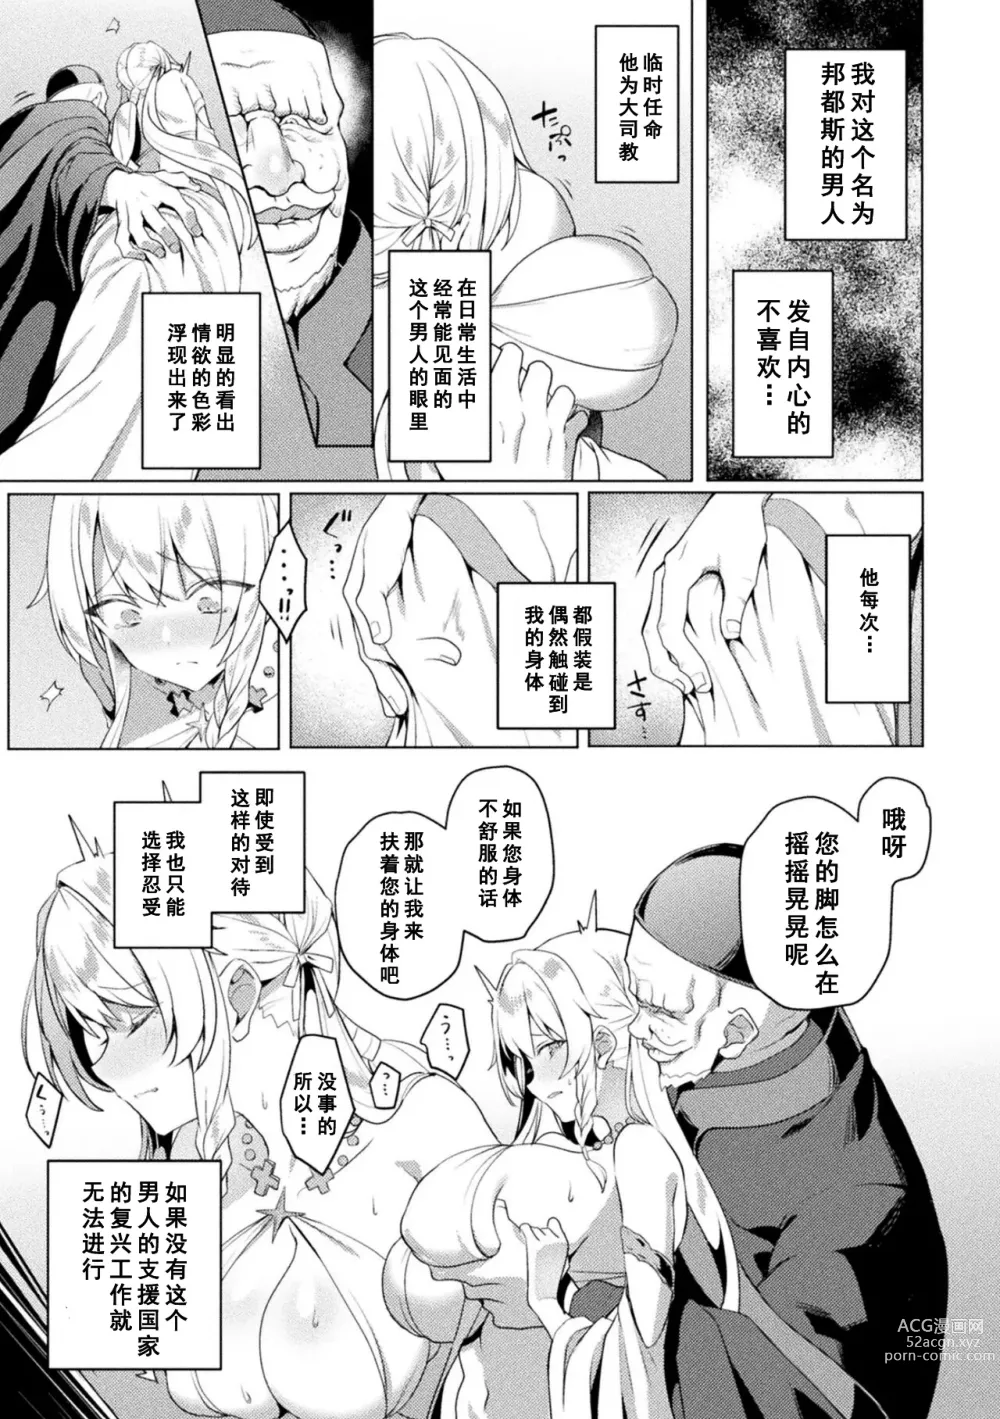 Page 5 of manga Edens Ritter Ch. 1 Gaiden - Innan no Mikohime Cecily Hen THE COMIC Ch. 1